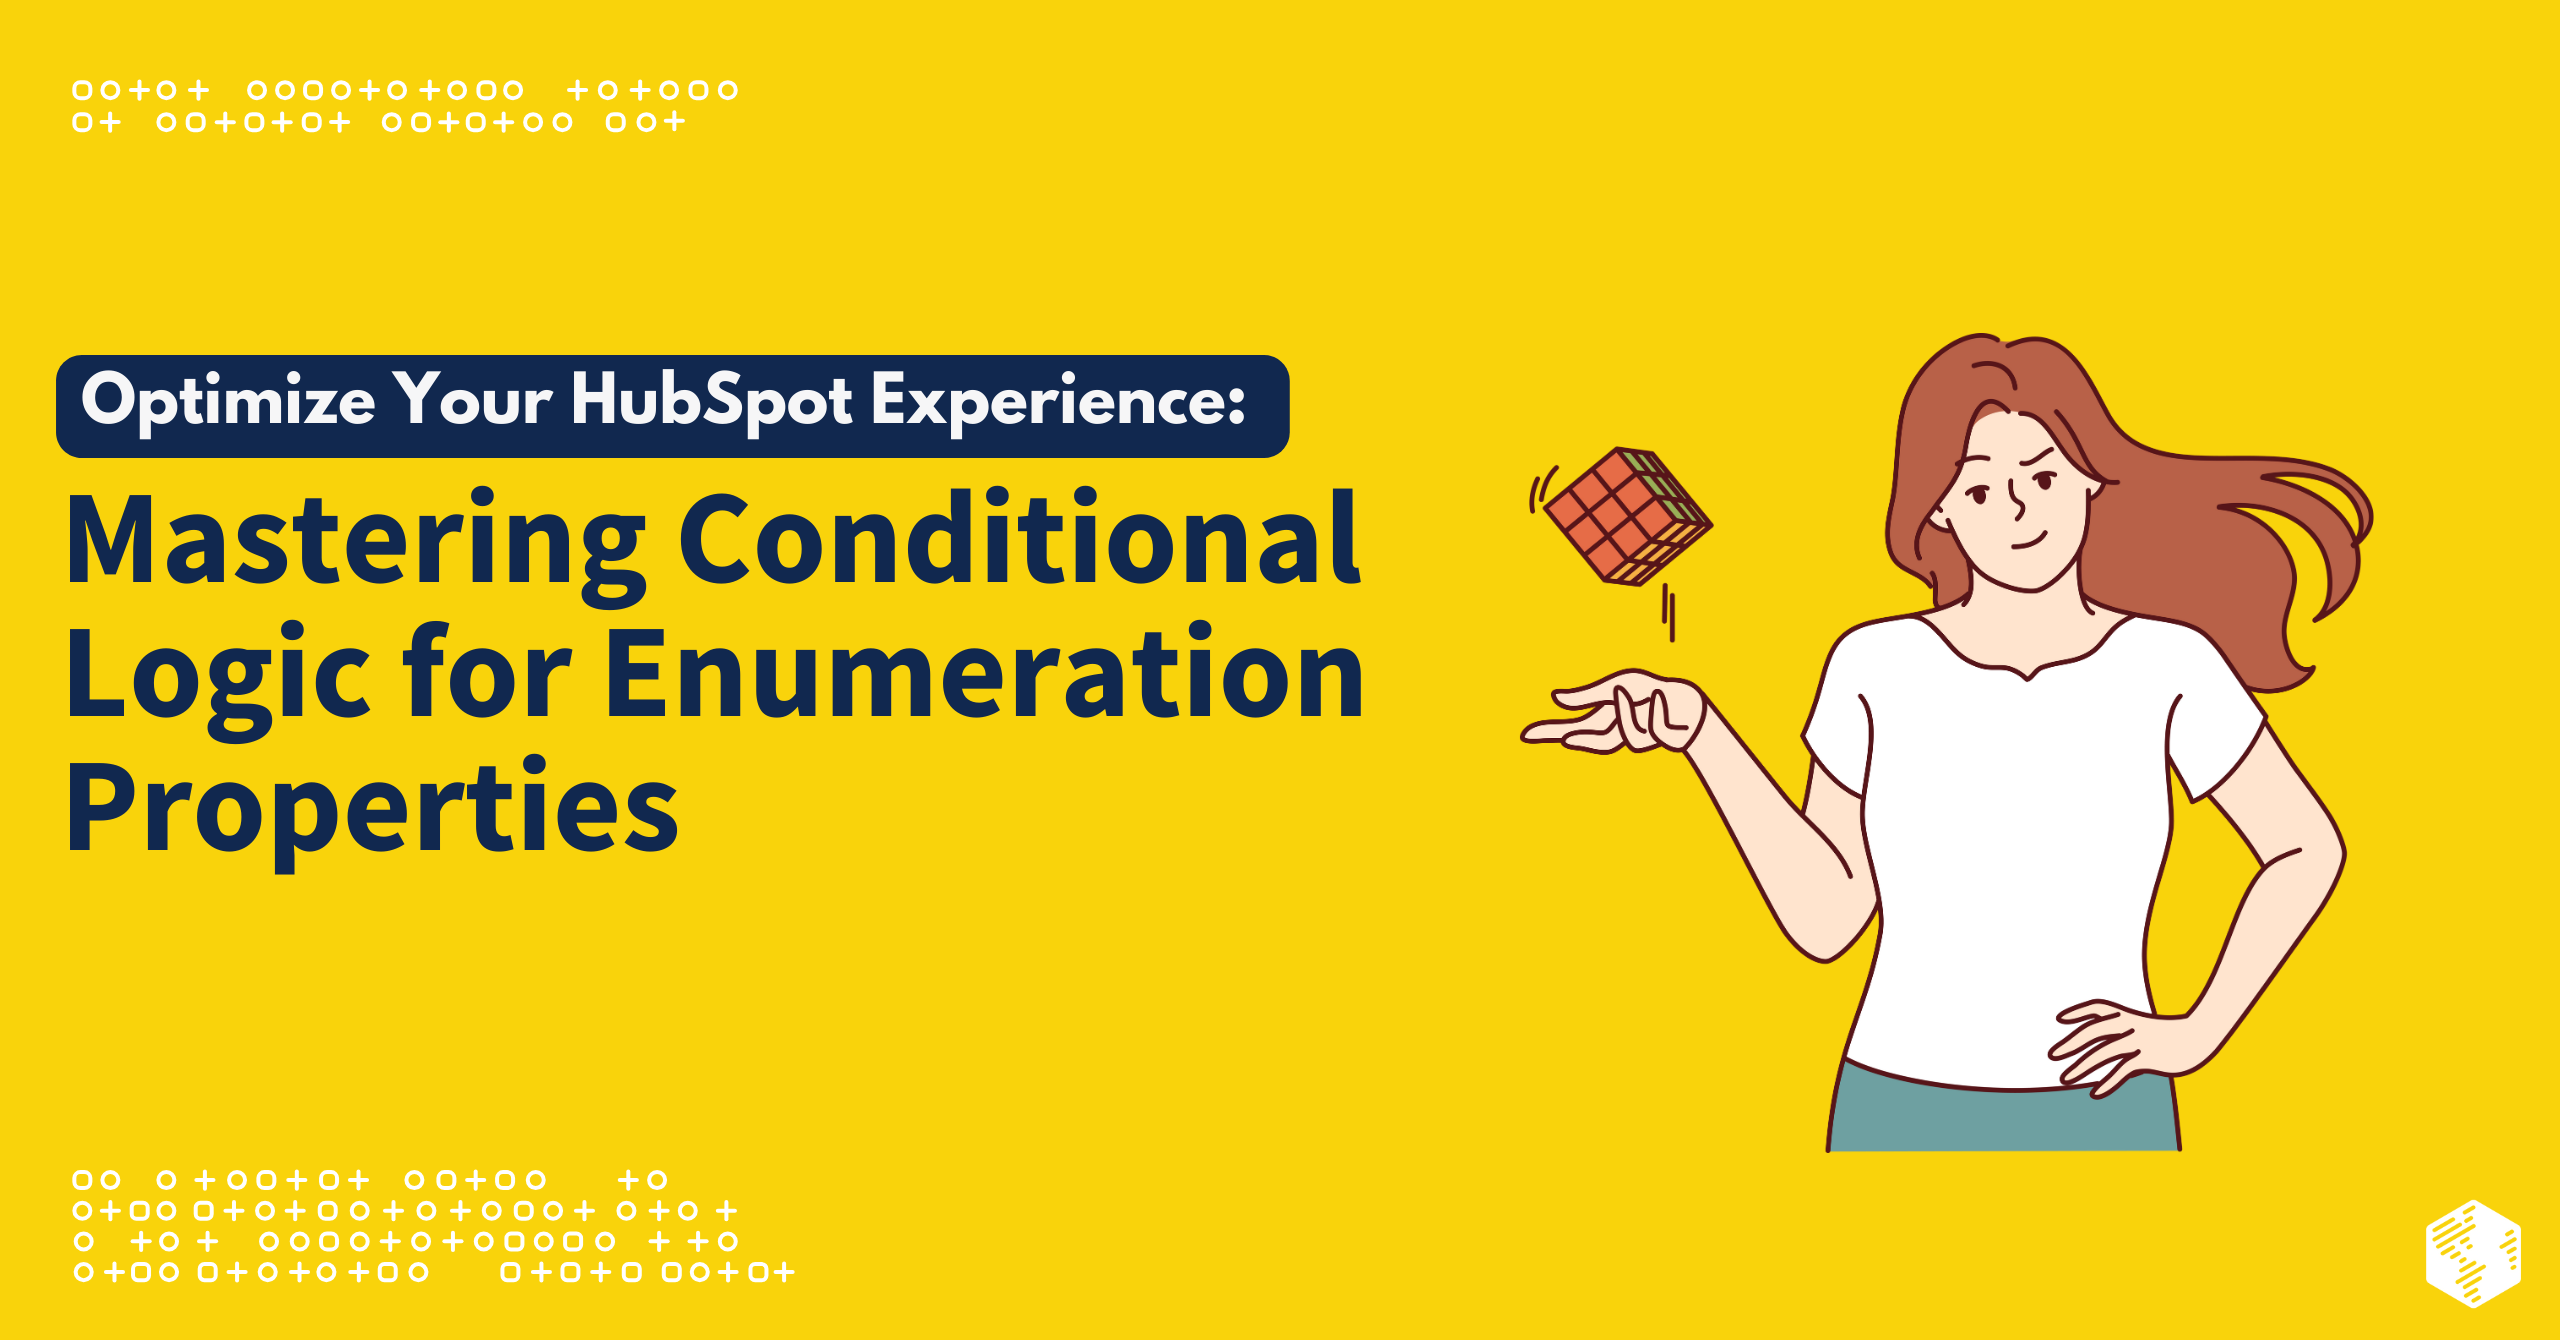 Optimize Your HubSpot Experience: Mastering Conditional Logic for Enumeration Properties